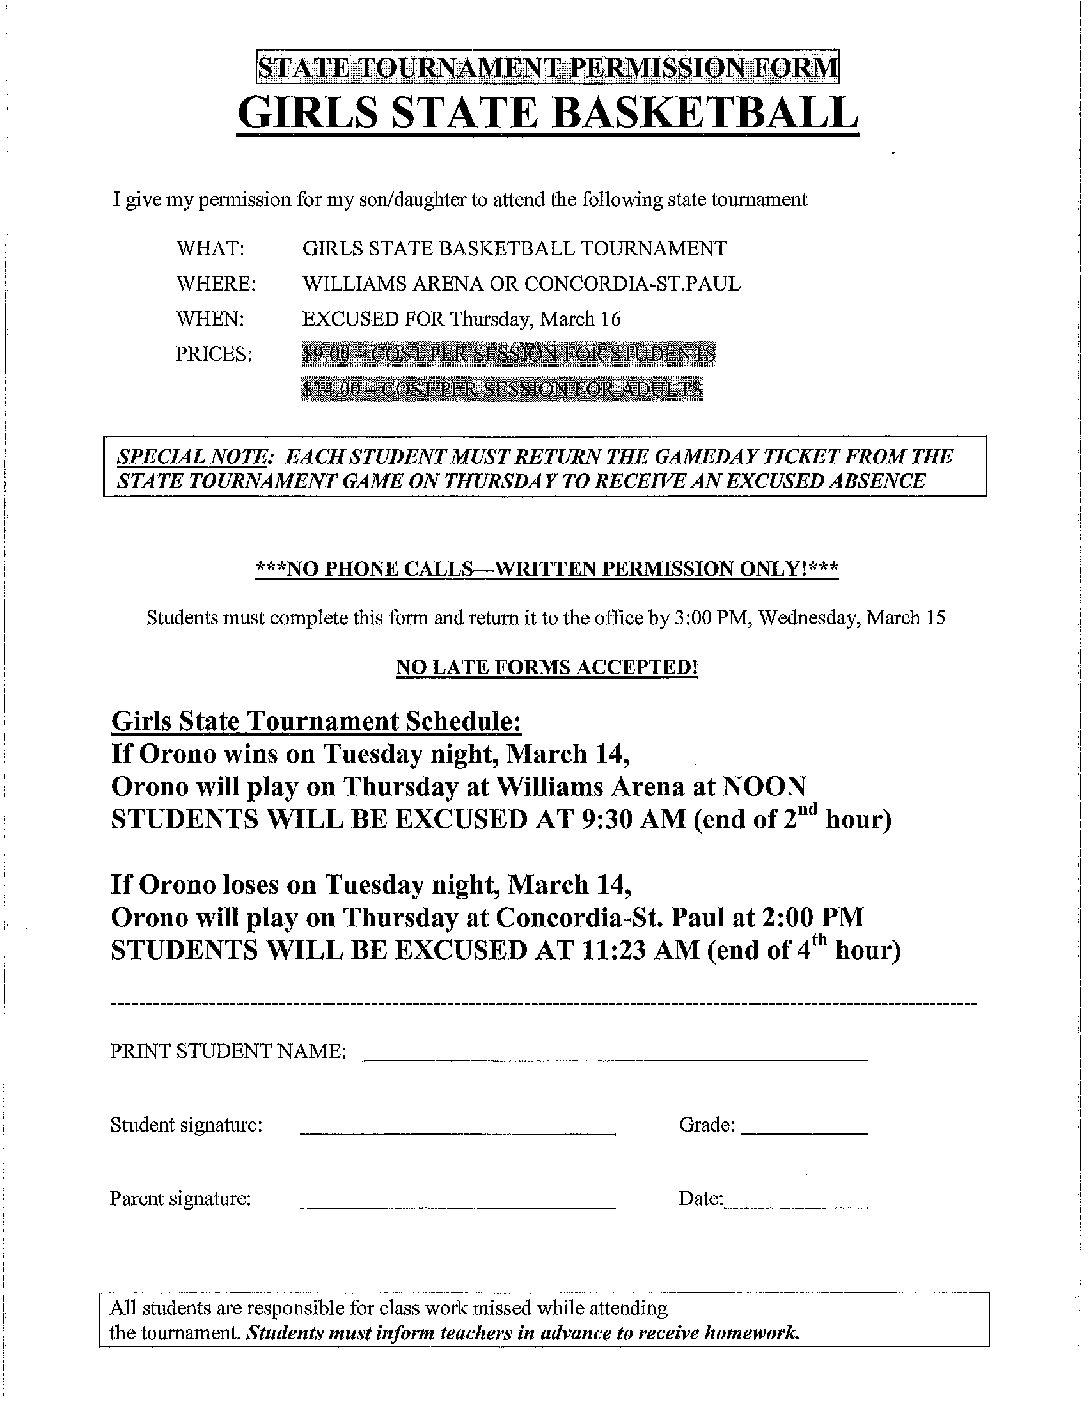 An example of the form students have to fill out prior to a sporting event.